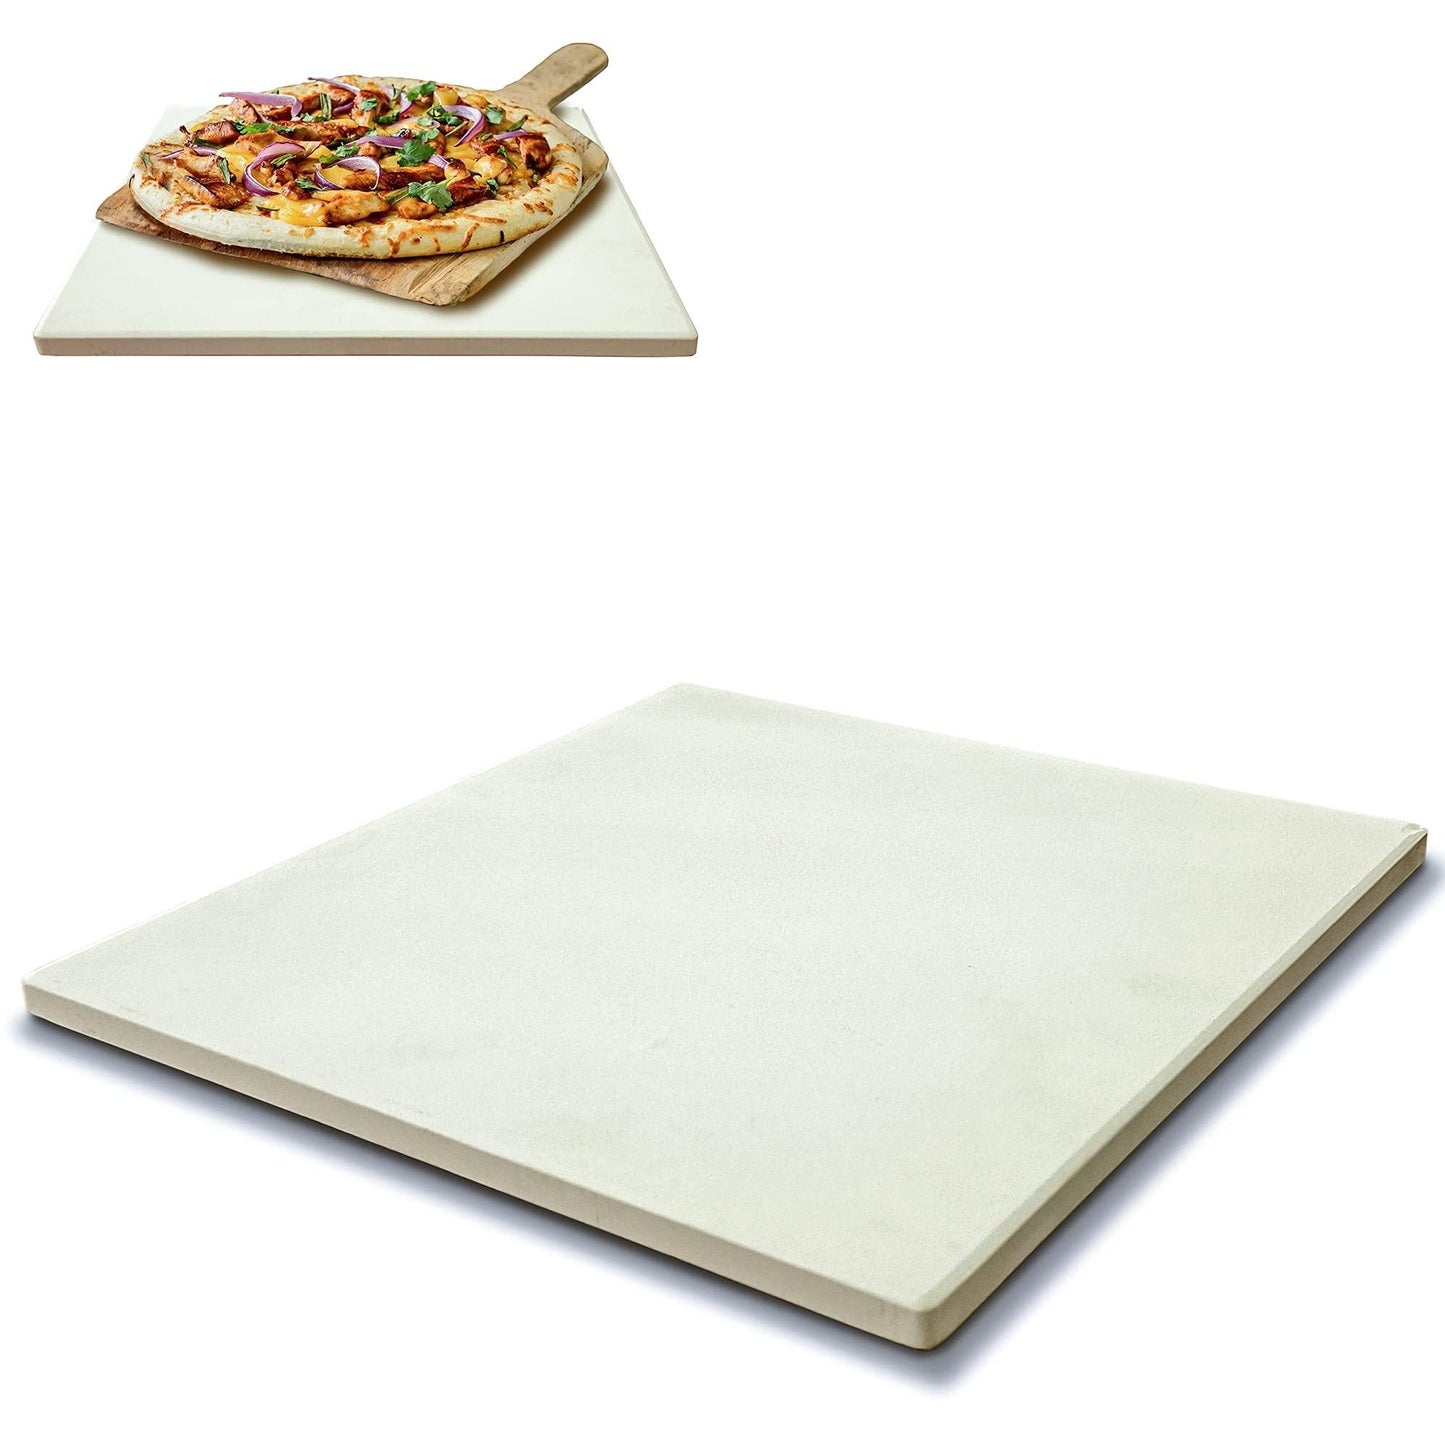 BBQSTAR Cordierite Pizza Stone for Grill and Oven/Smoker, 11-Inch Square Small Ceramic Pizza Stone, Baking Stone for Bread and Cookies,Thermal Shock Resistant Cooking Stone - CookCave